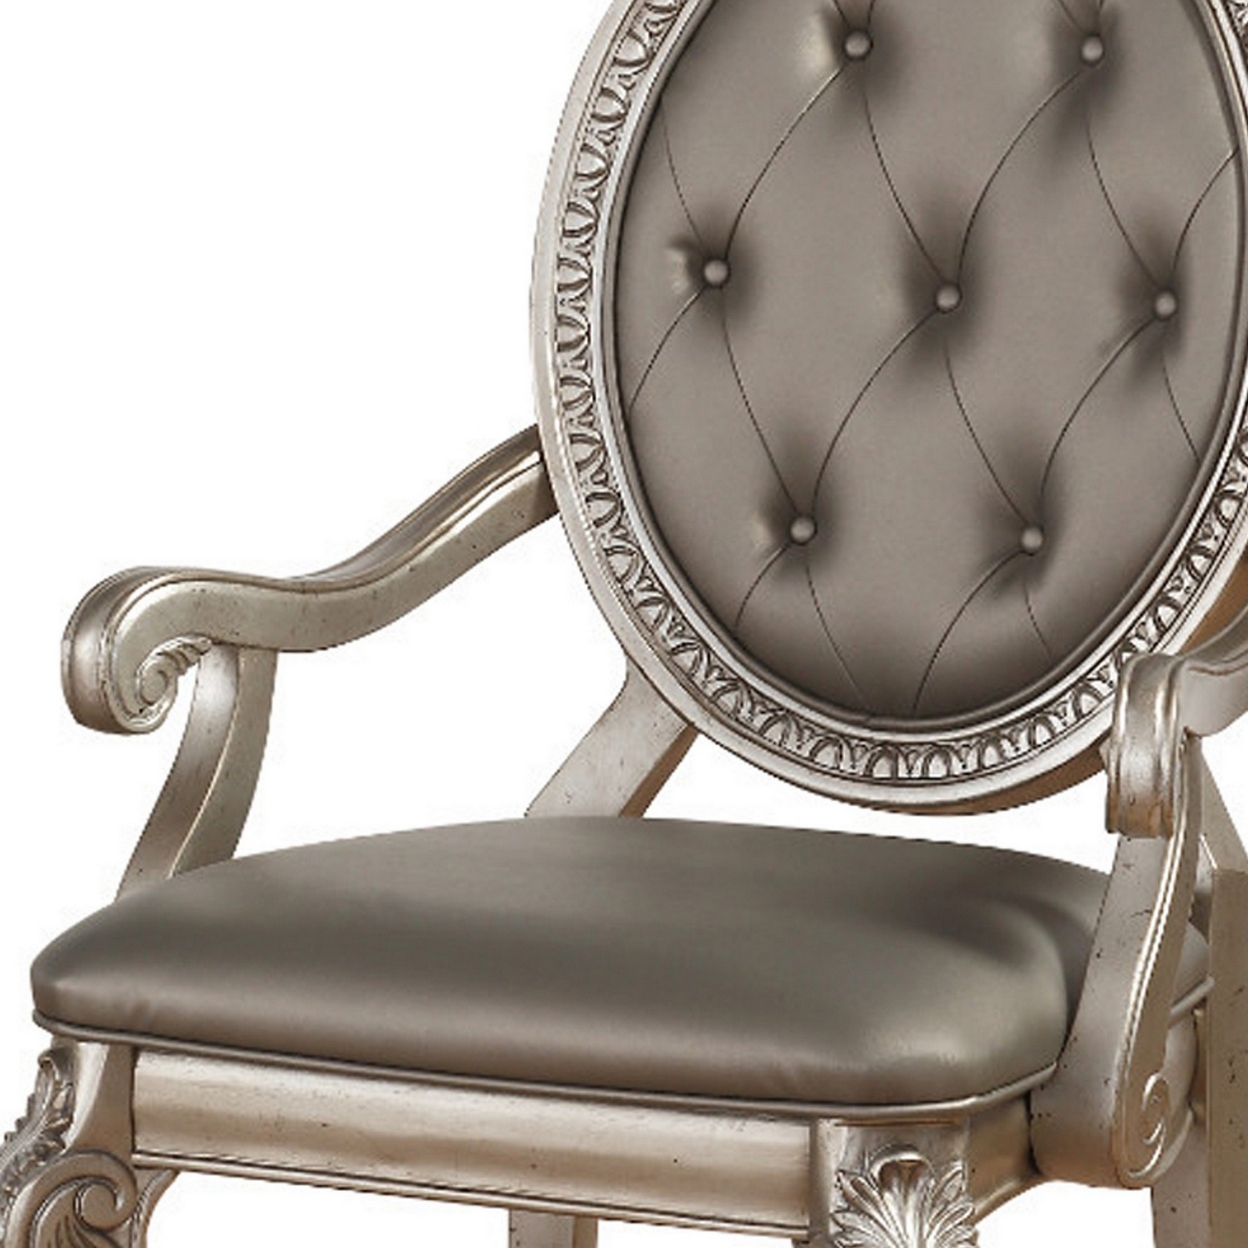 Faux Leather Upholstered Wooden Arm Chair With Carved Details, Gray And Gold, Set Of Two- Saltoro Sherpi